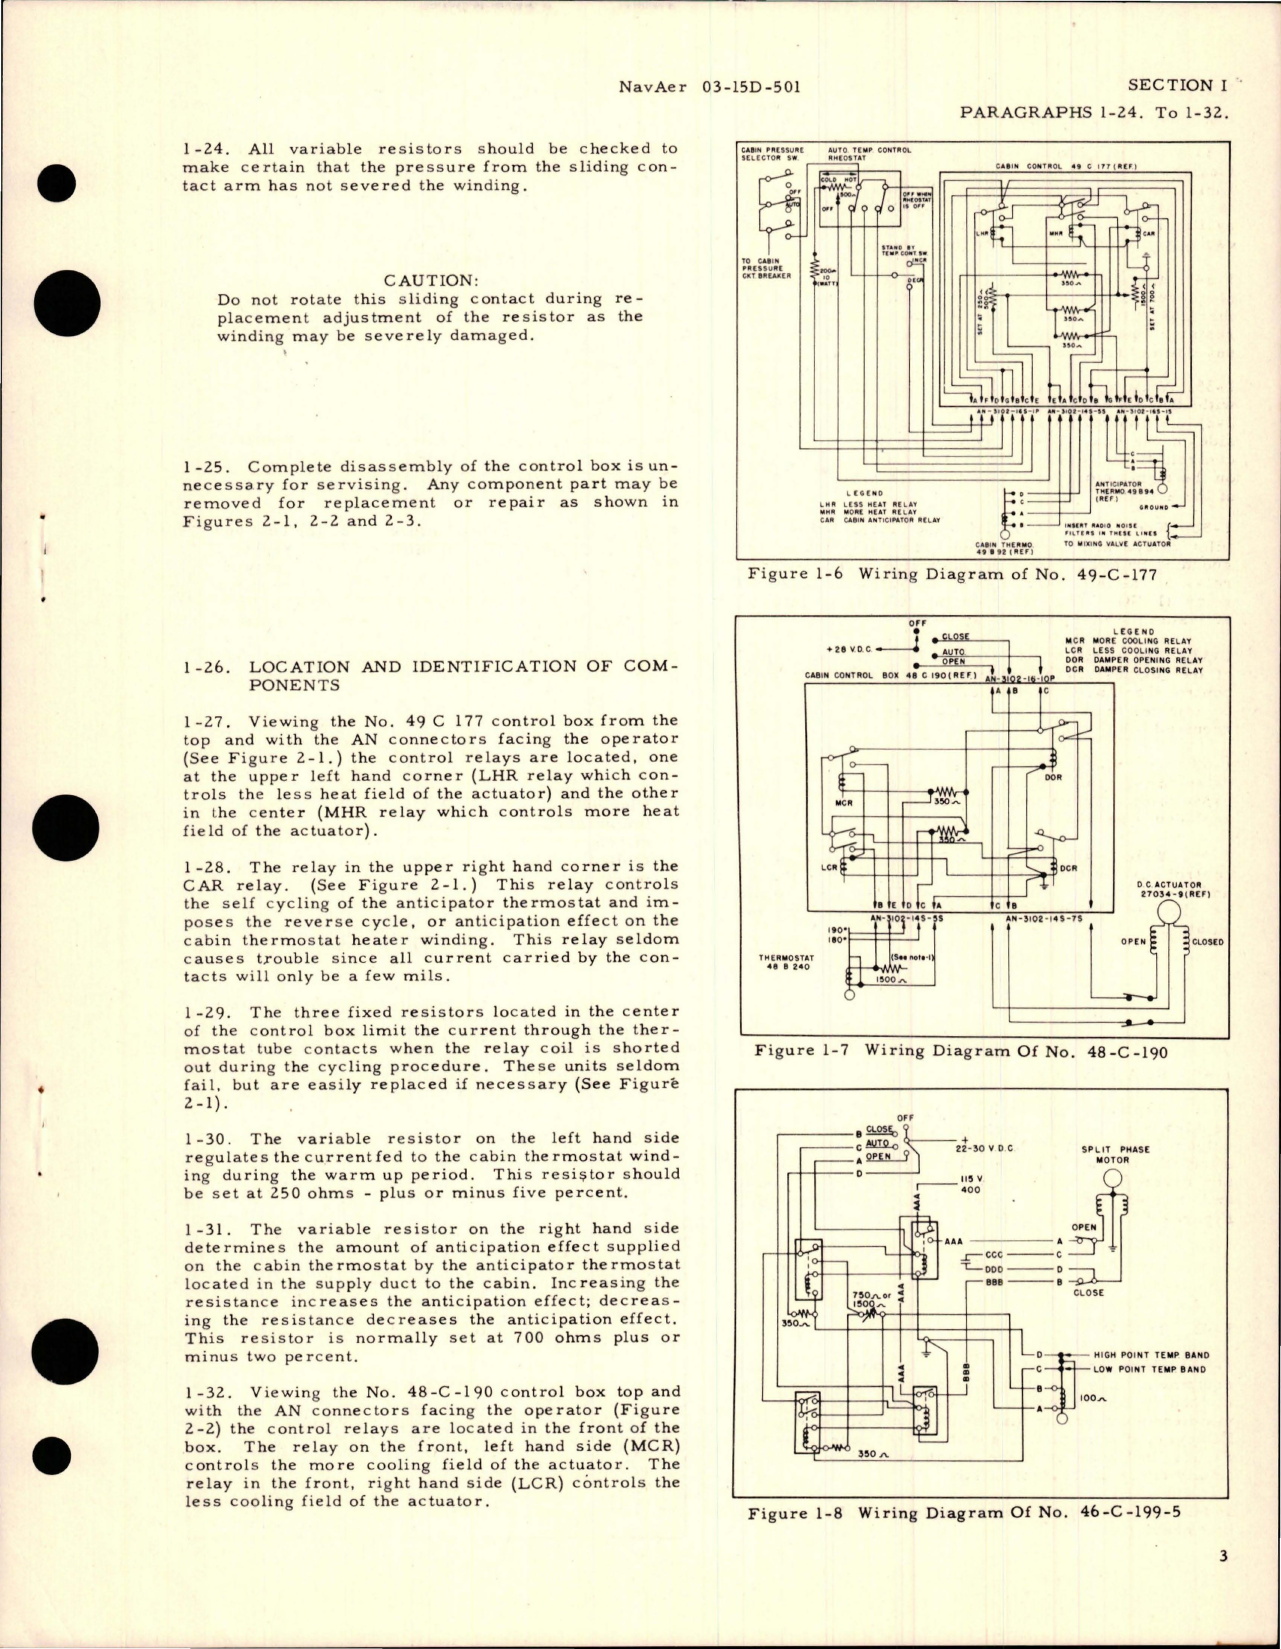 Sample page 5 from AirCorps Library document: Overhaul Instructions with Parts Catalog for Control Boxes - Parts 49-C-177, 48-C-190, and 46-C-199-5